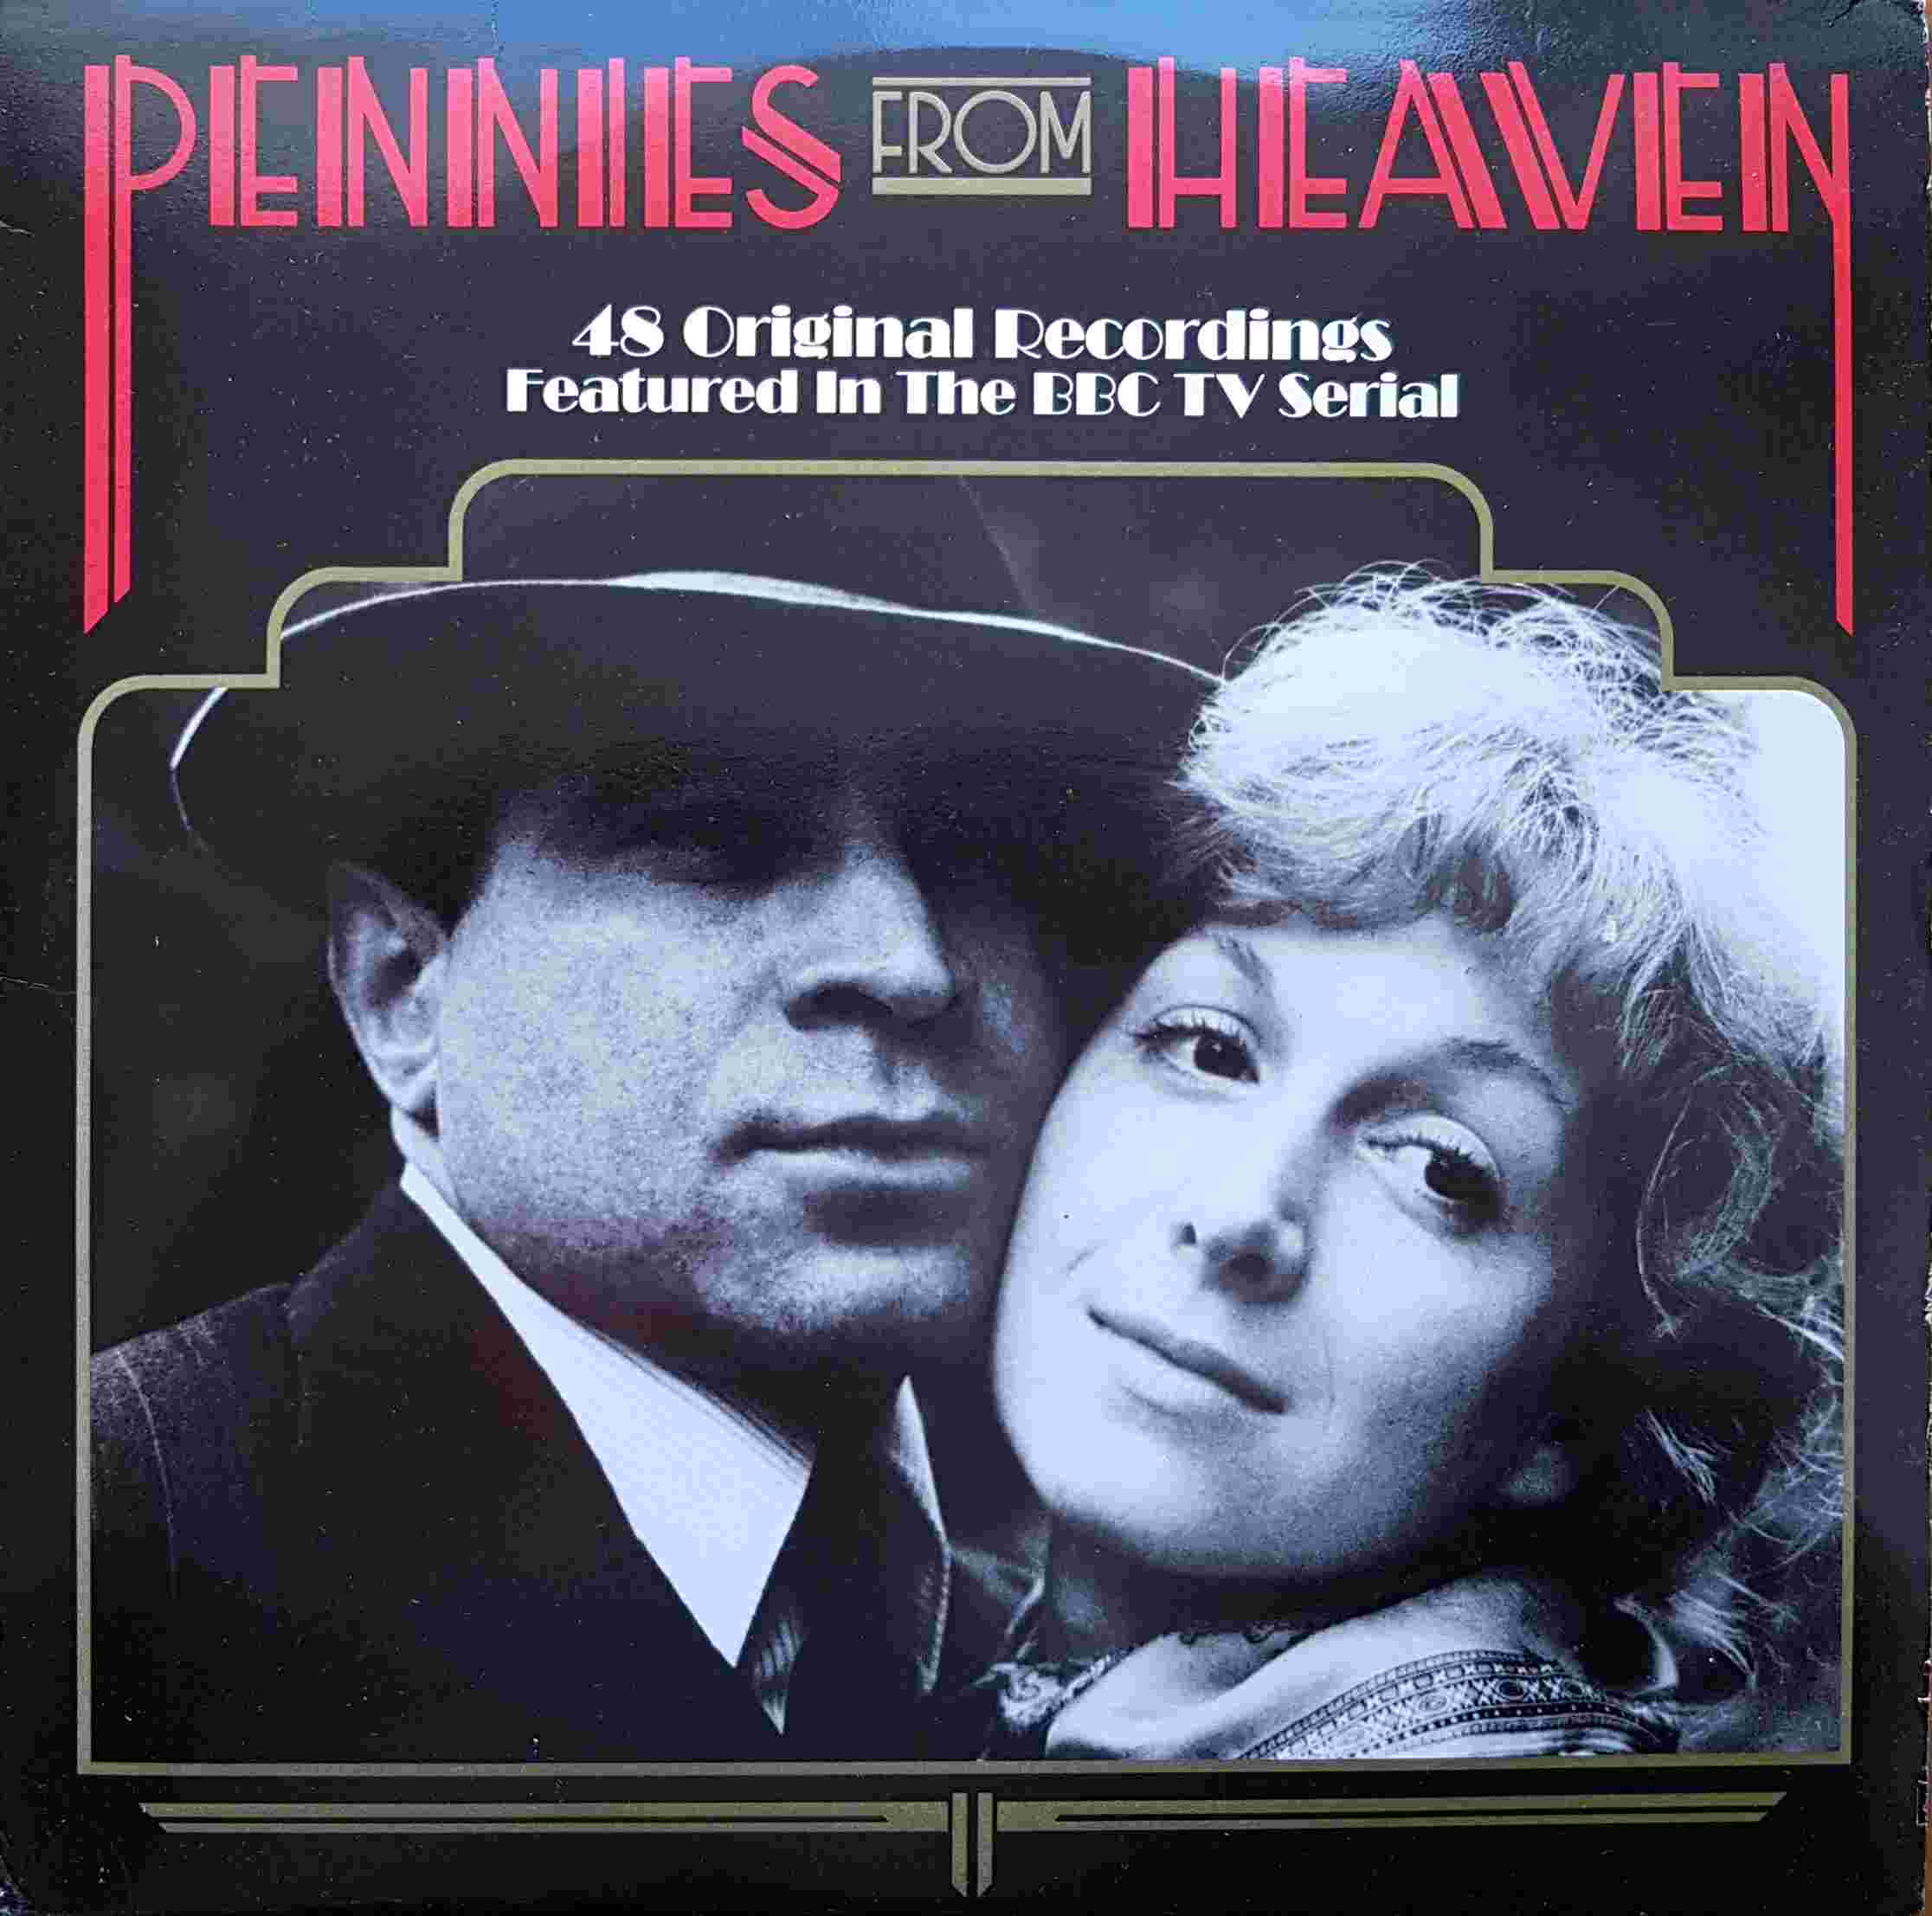 Picture of REF 768 Pennies from Heaven by artist Various from the BBC albums - Records and Tapes library